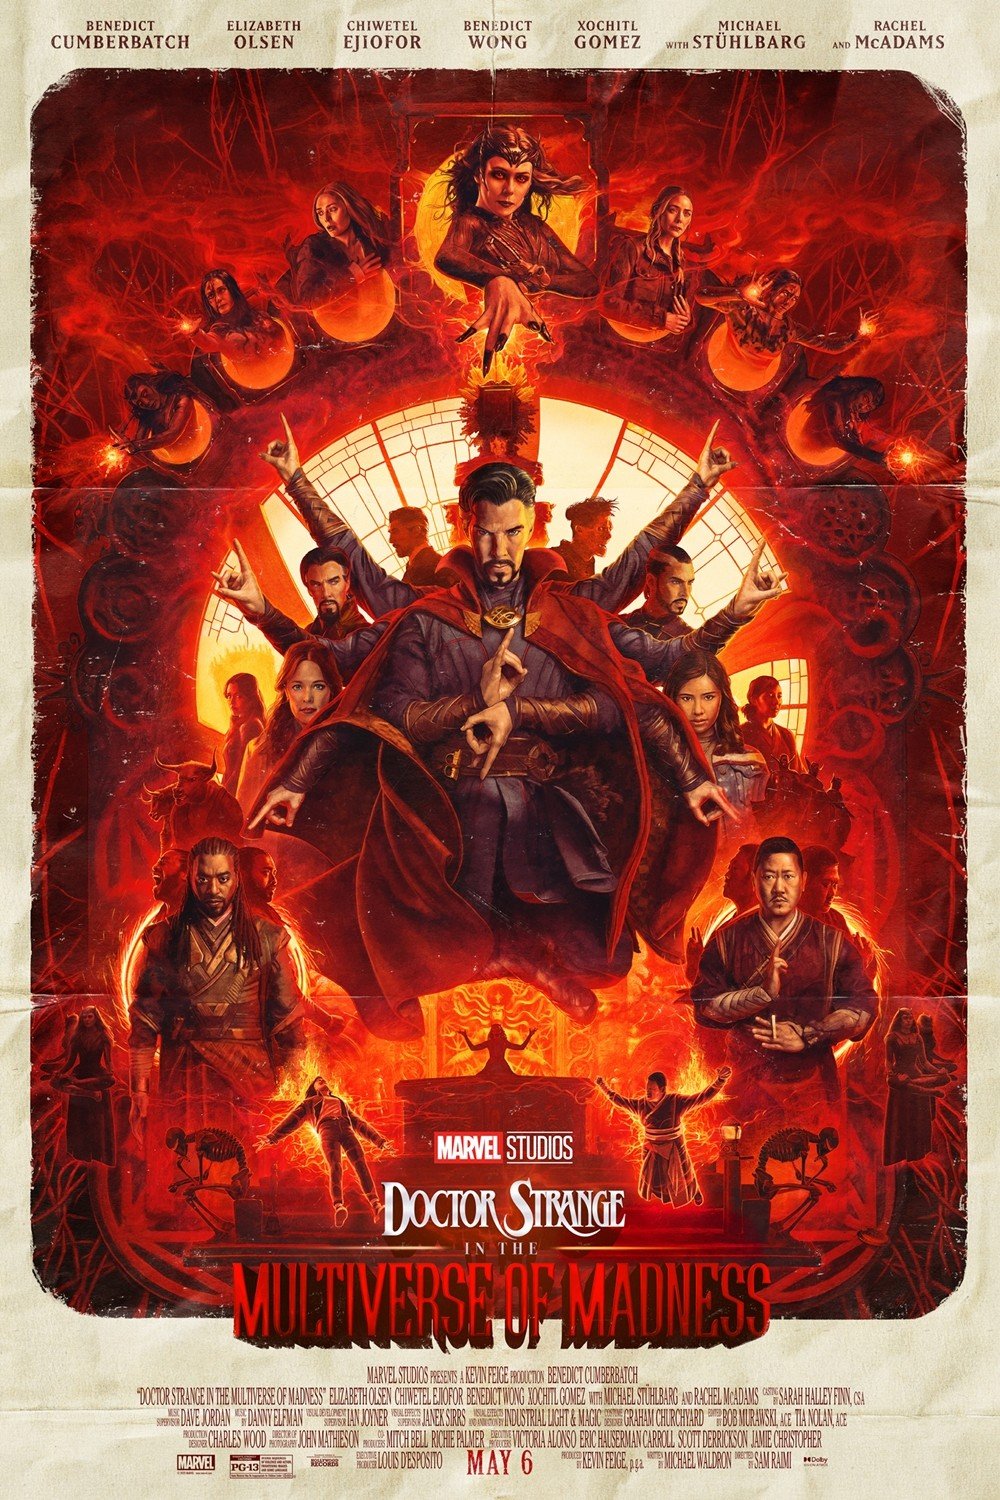 Poster of Doctor Strange in the Multiverse of Madness 3D